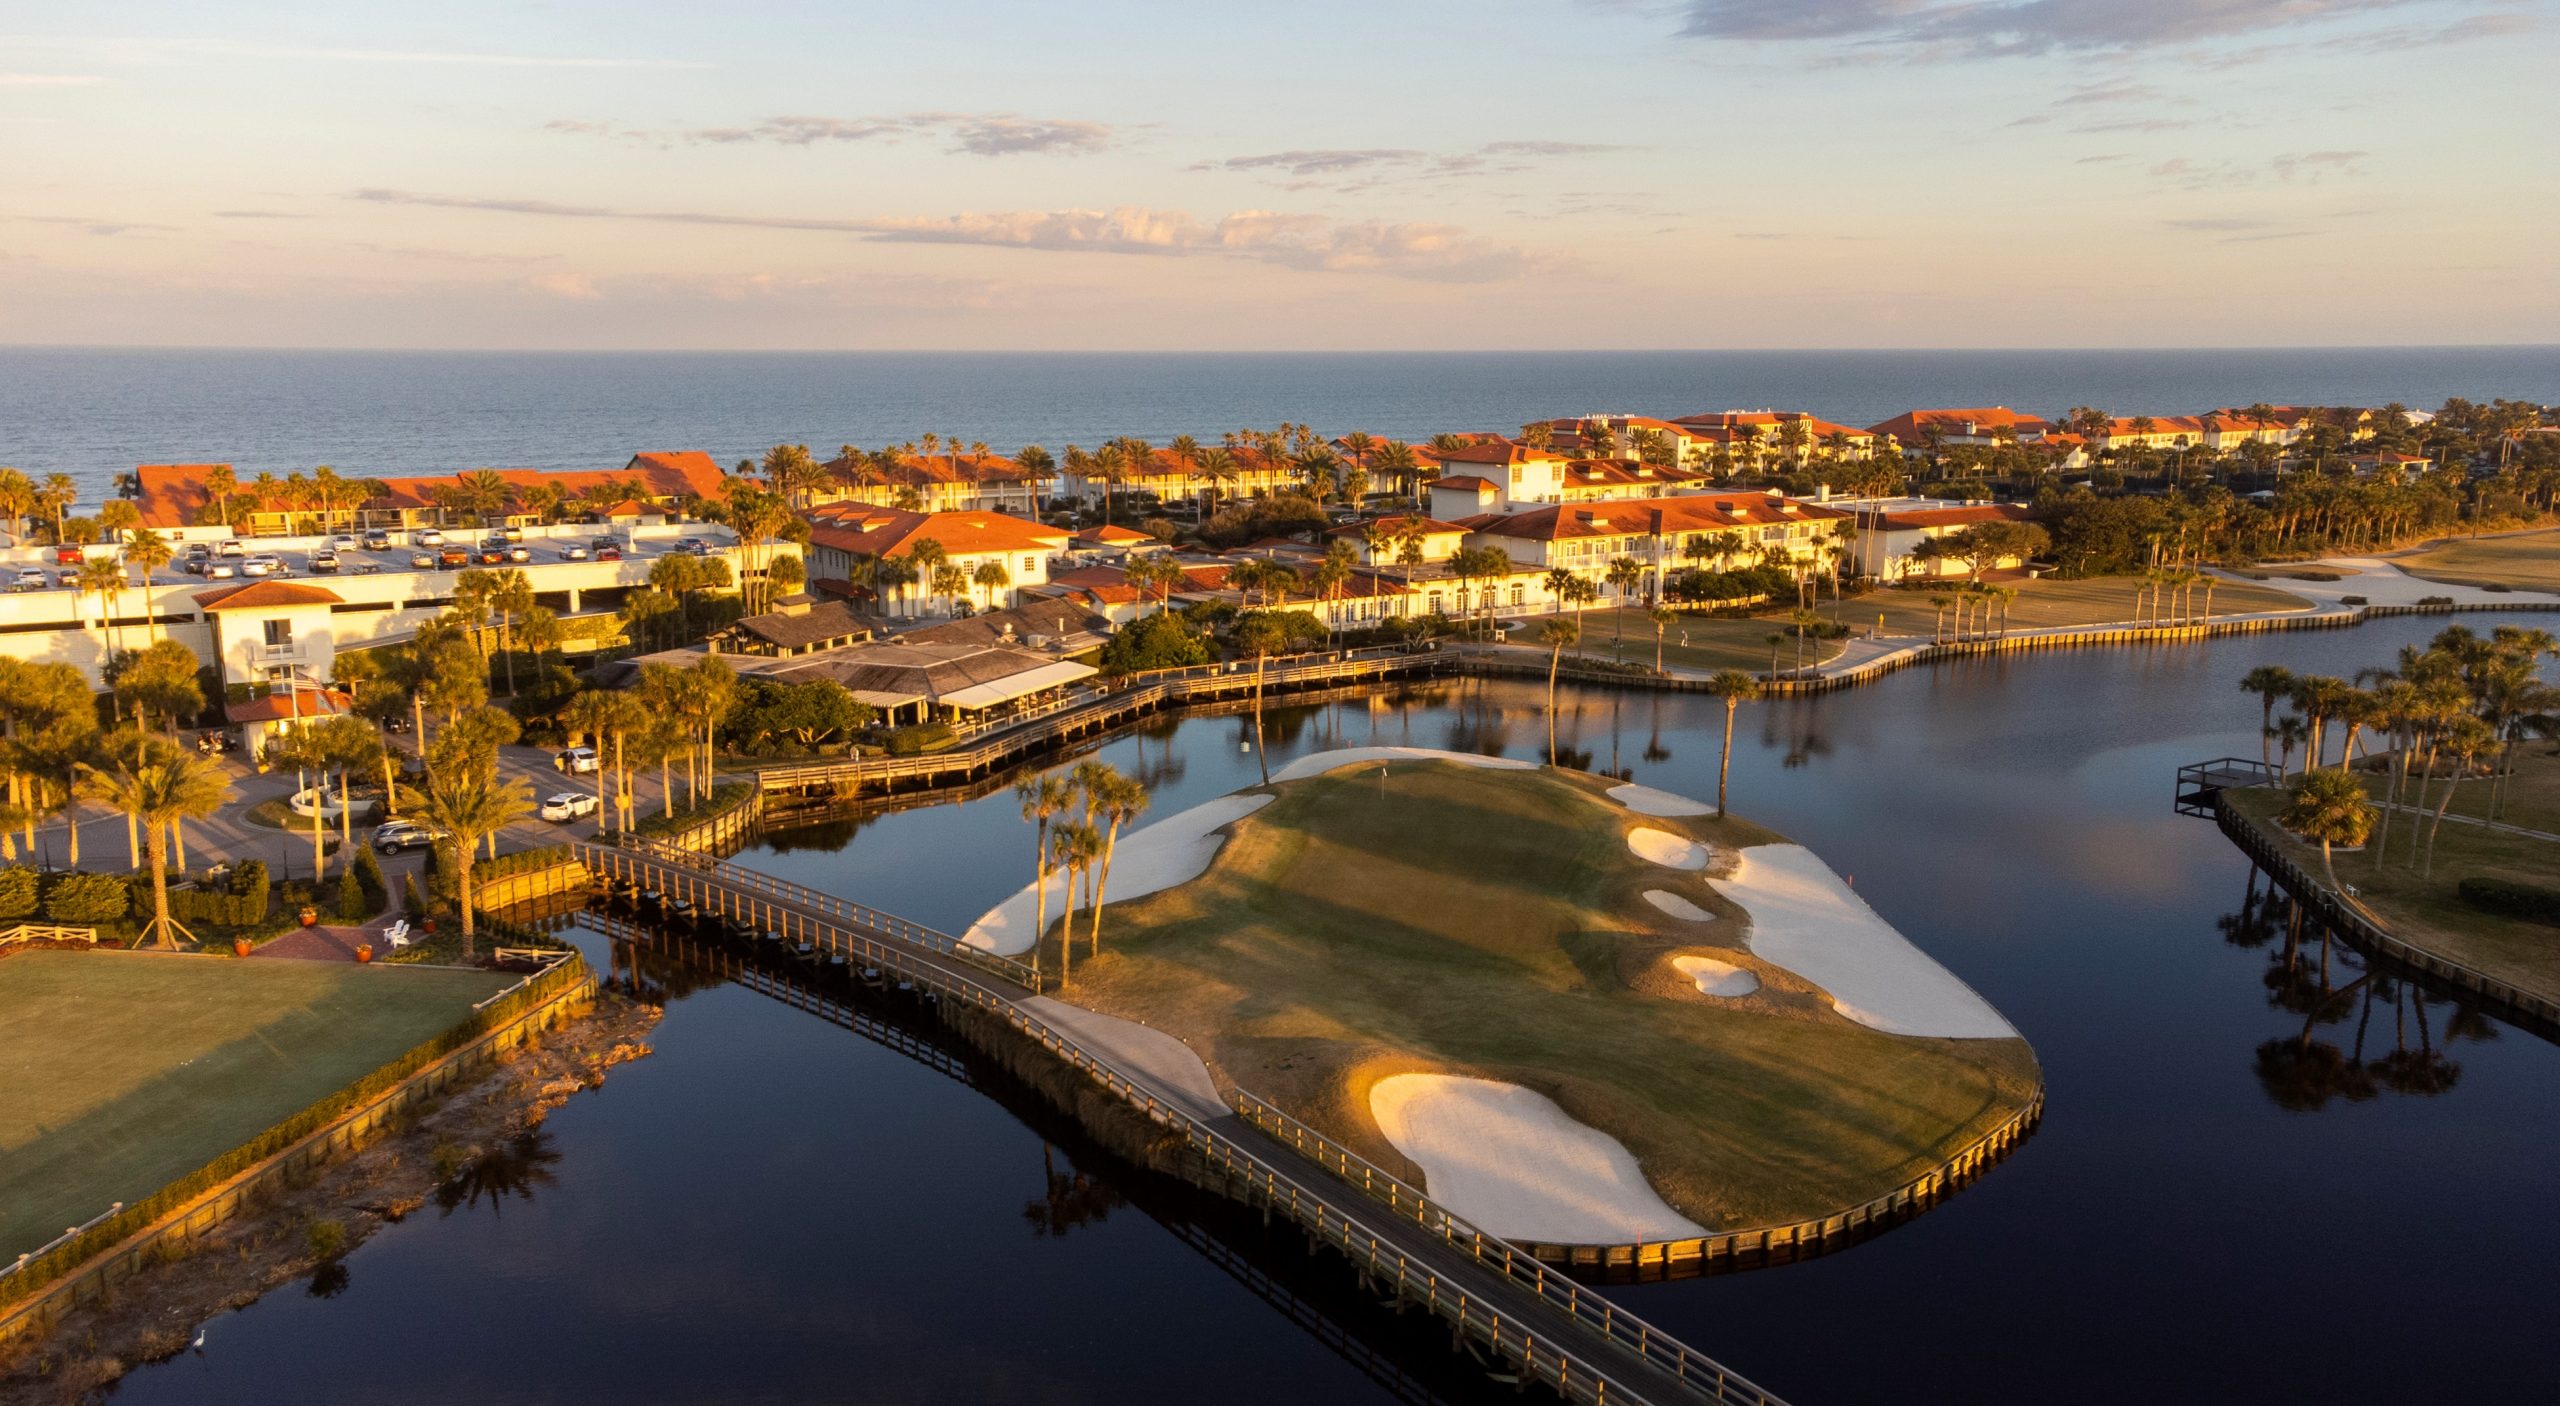 Ponte Vedra Inn & Club Famed Ocean Course Opens After Year-Long Renovation Project